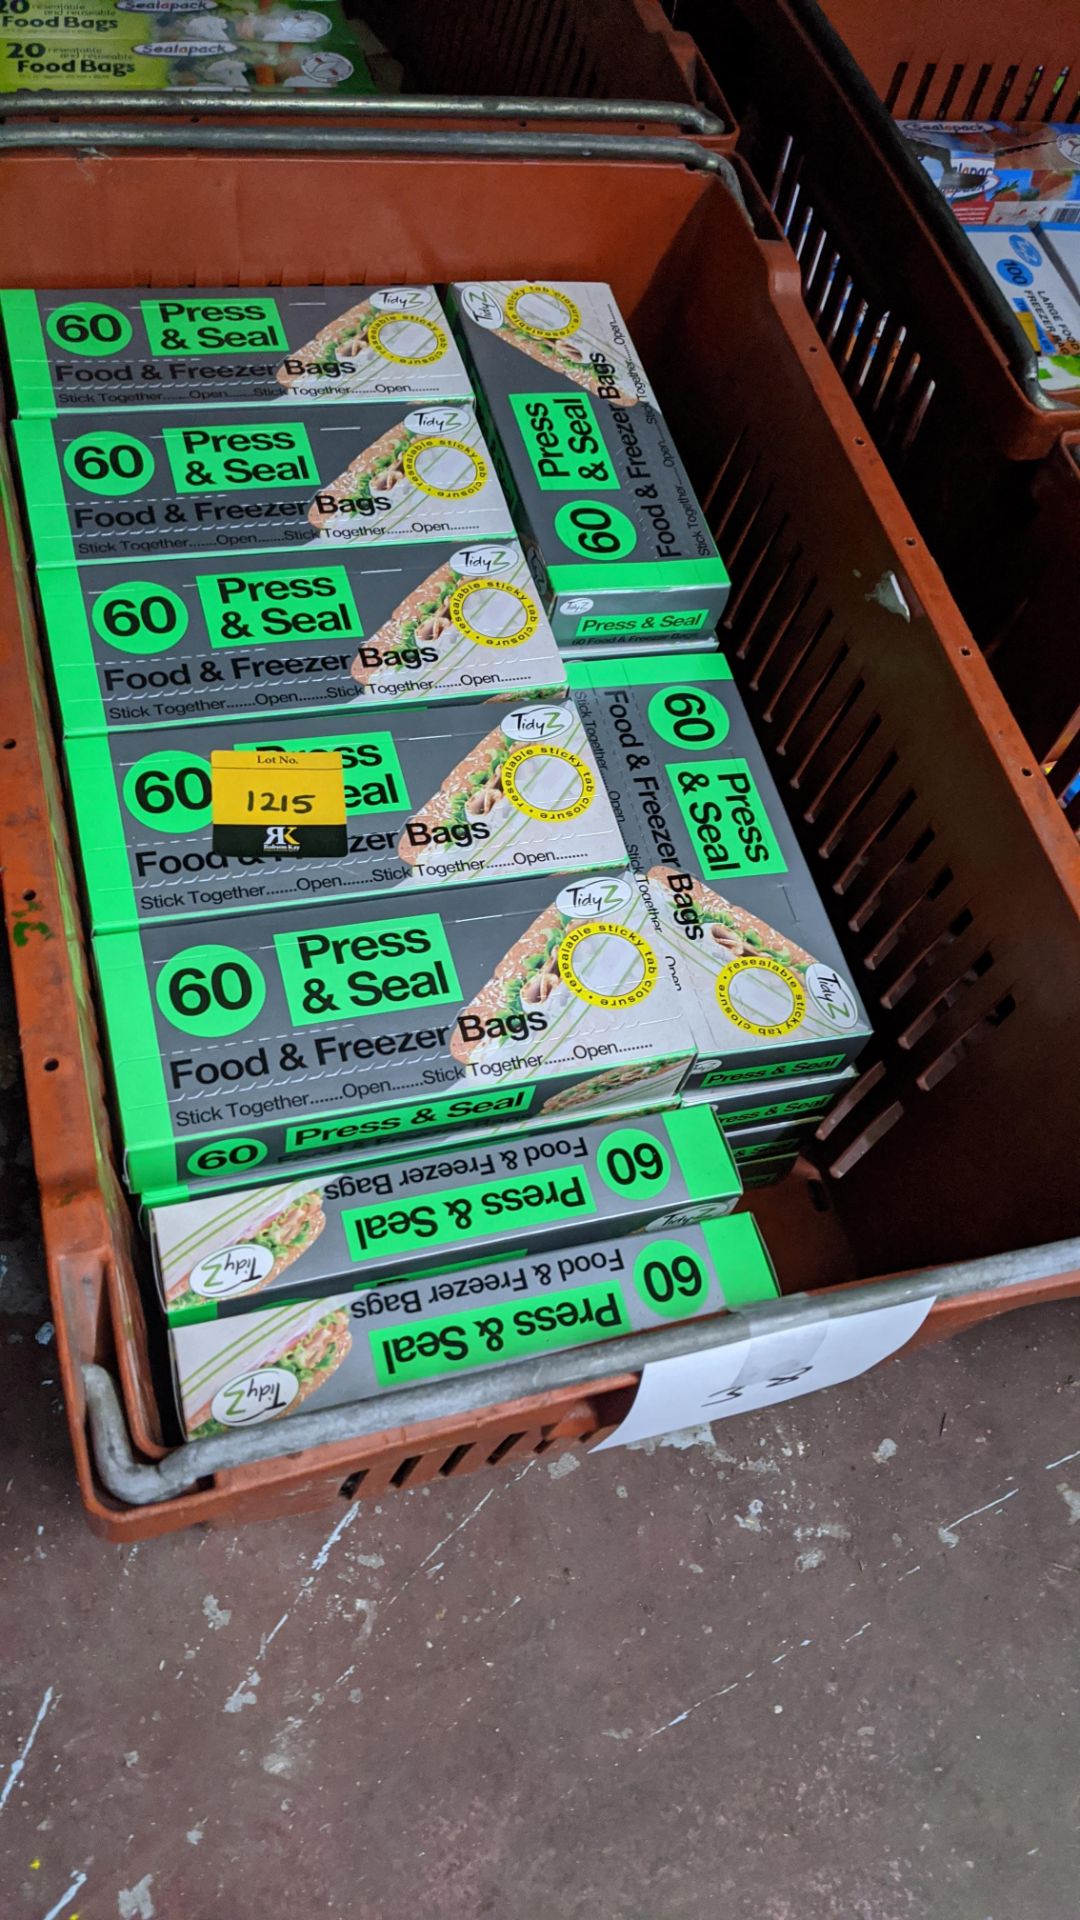 38 boxes of Press & Seal food & freezer bags - crate excluded. IMPORTANT – DO NOT BID BEFORE READING